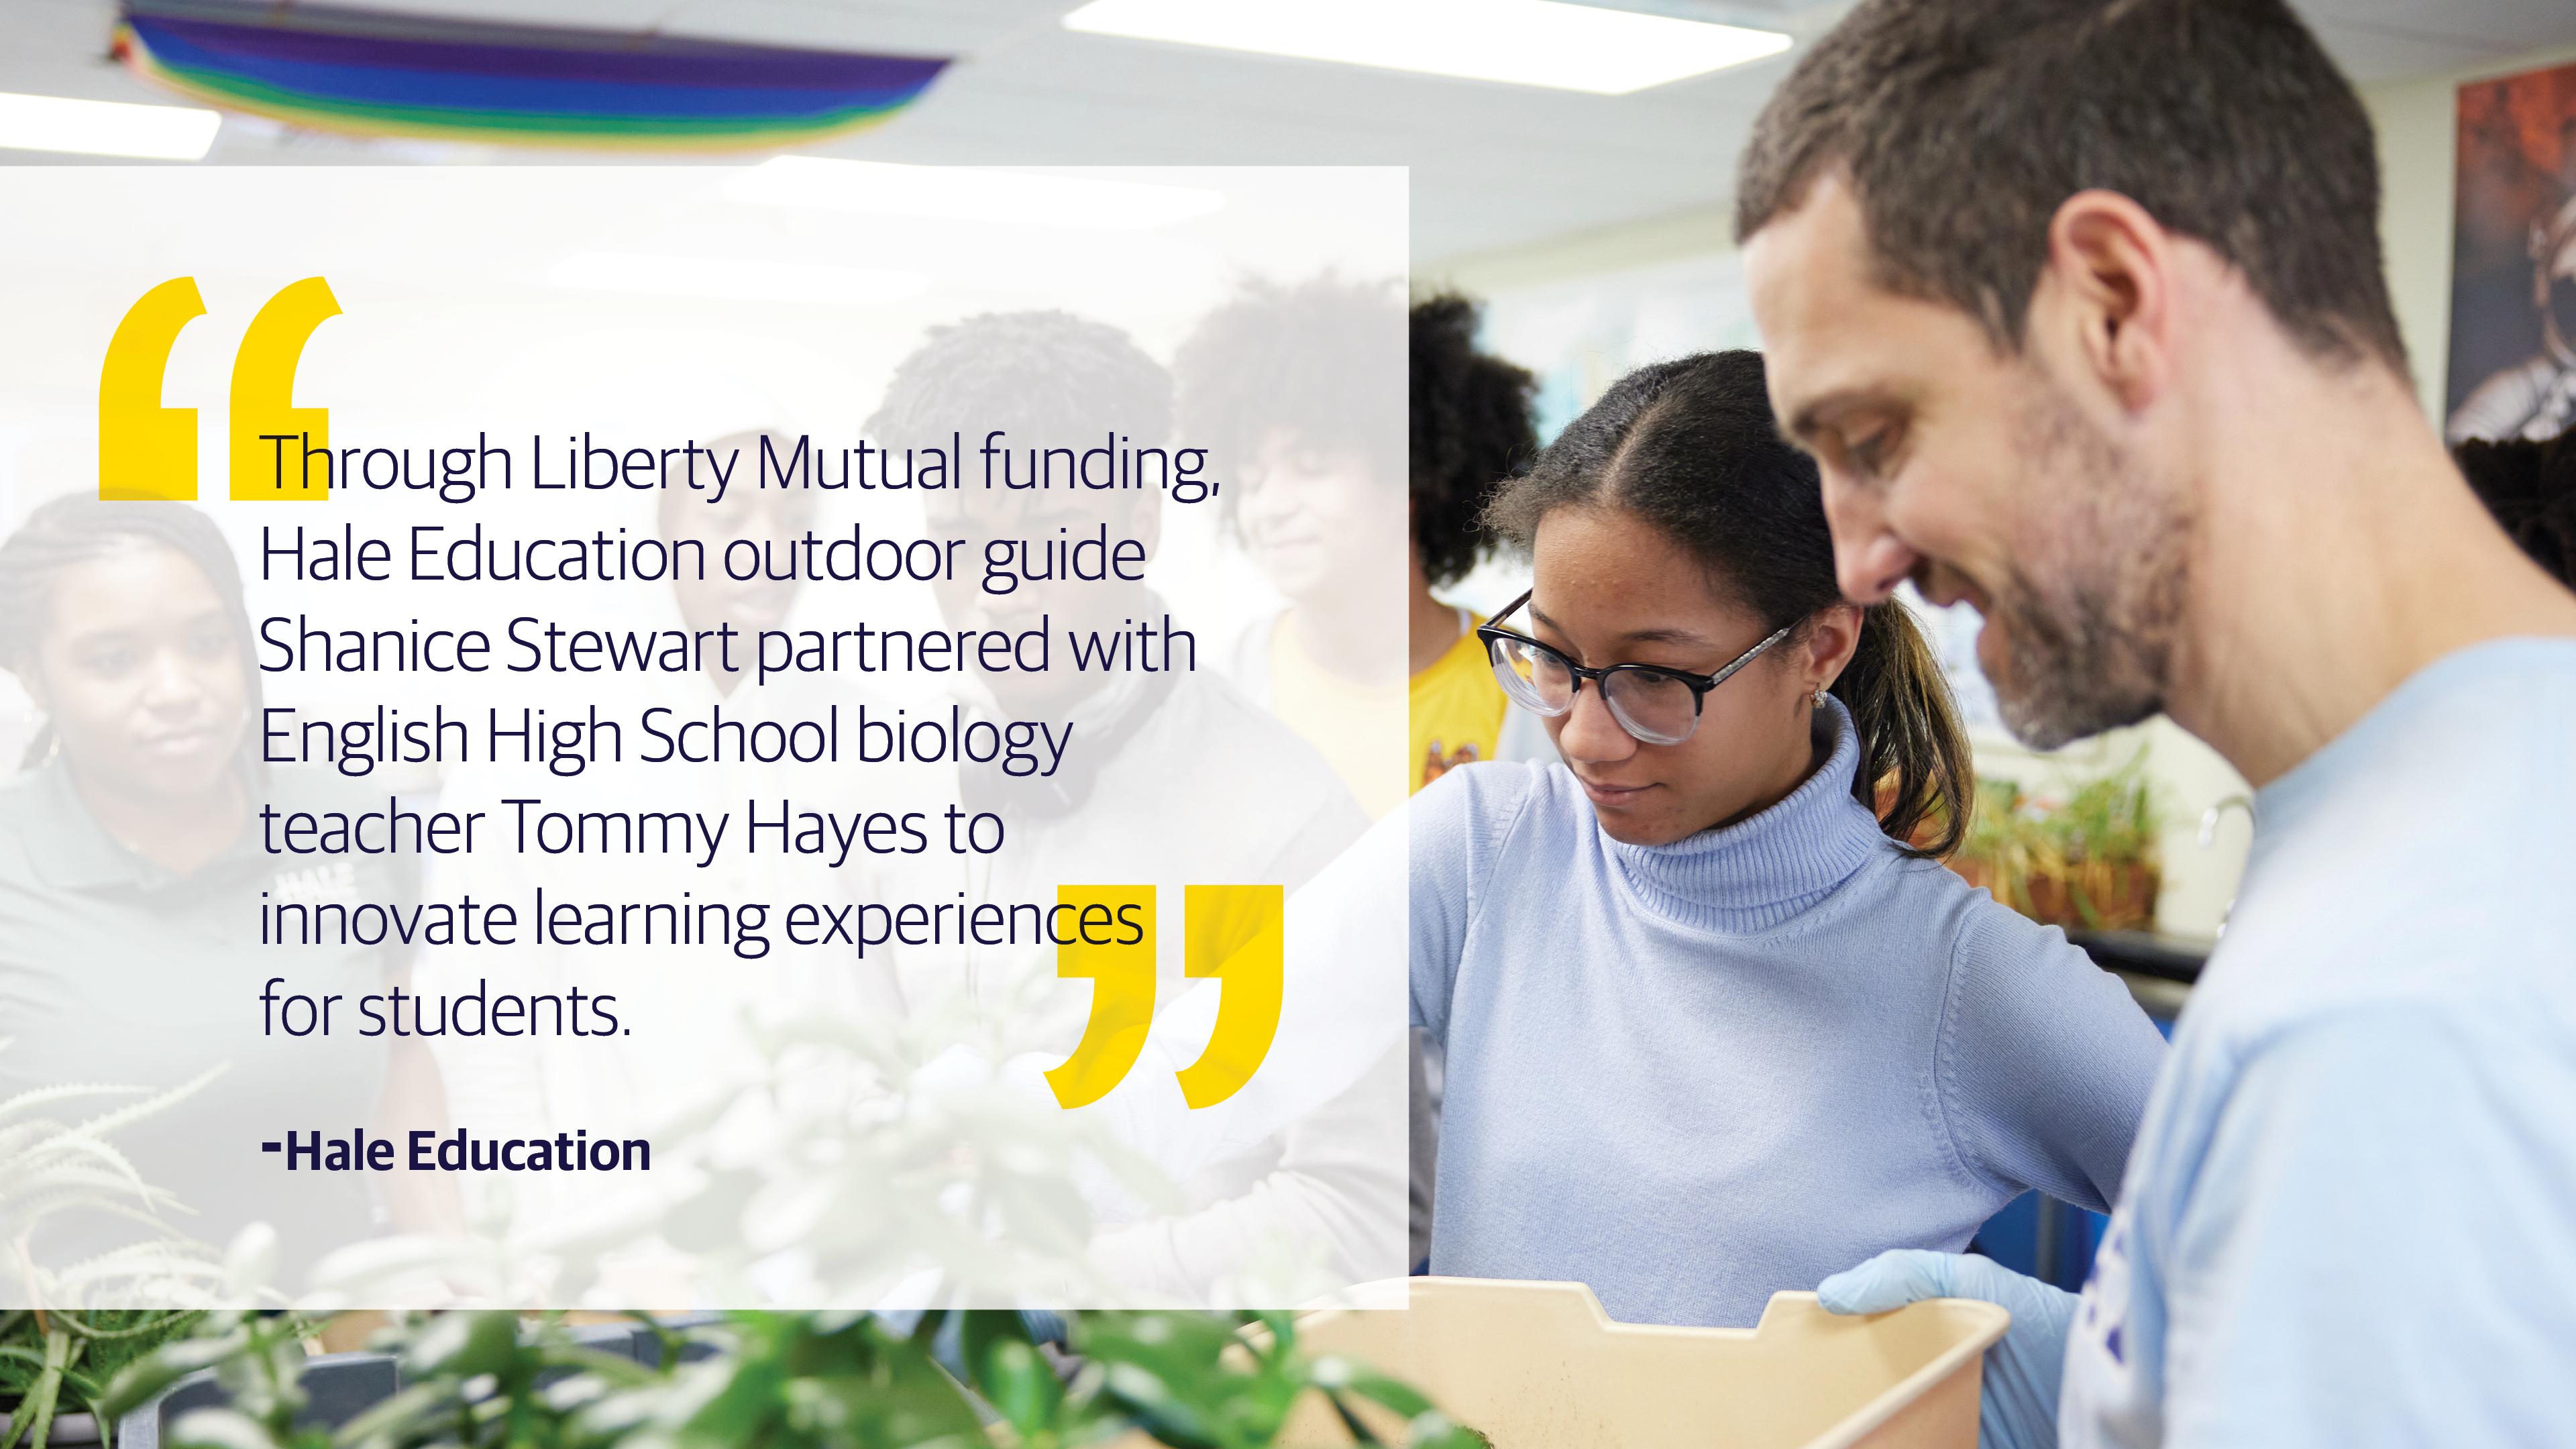 (slide 3 of 4) "Through Liberty Mutual funding, Hale Education outdoor guide Shanice Stewart partnered with English High School biology teacher Tommy Hayes to innovate learning experiences for students." - Hale Education. 